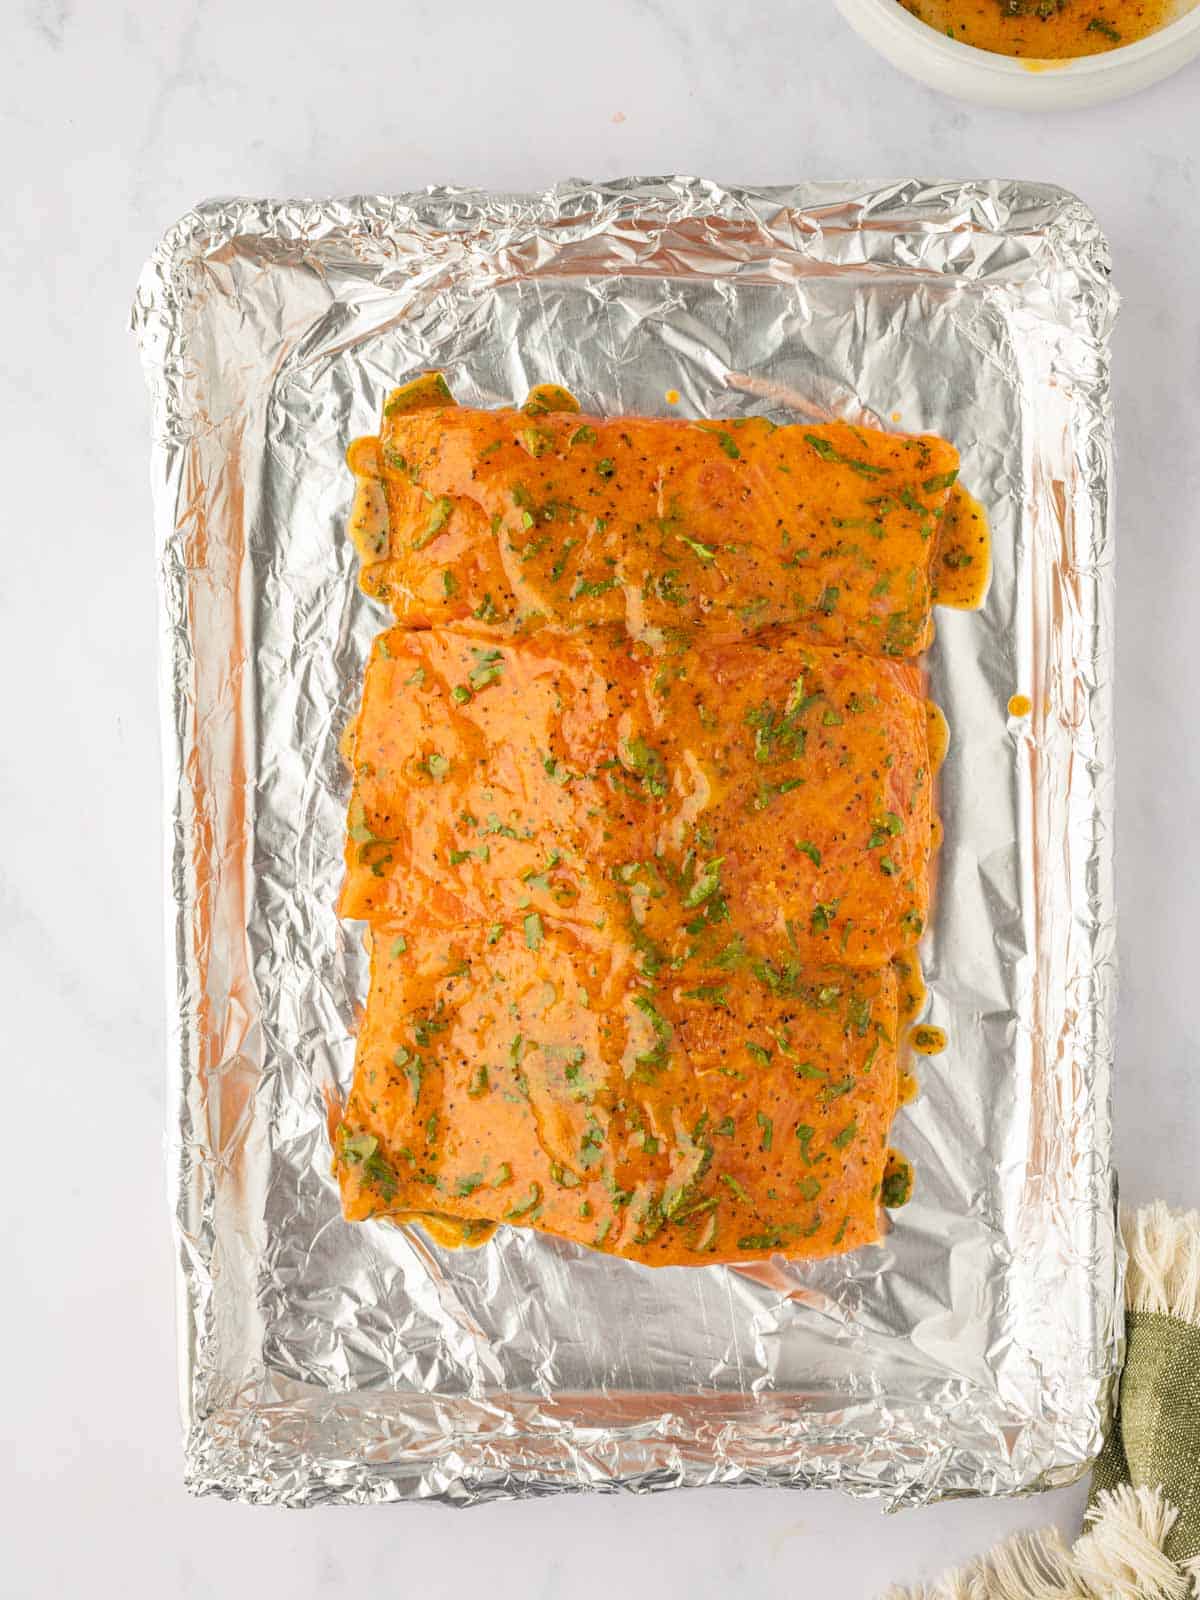 Salmon is topped with the lemon pepper marinade on a foil lined tray.